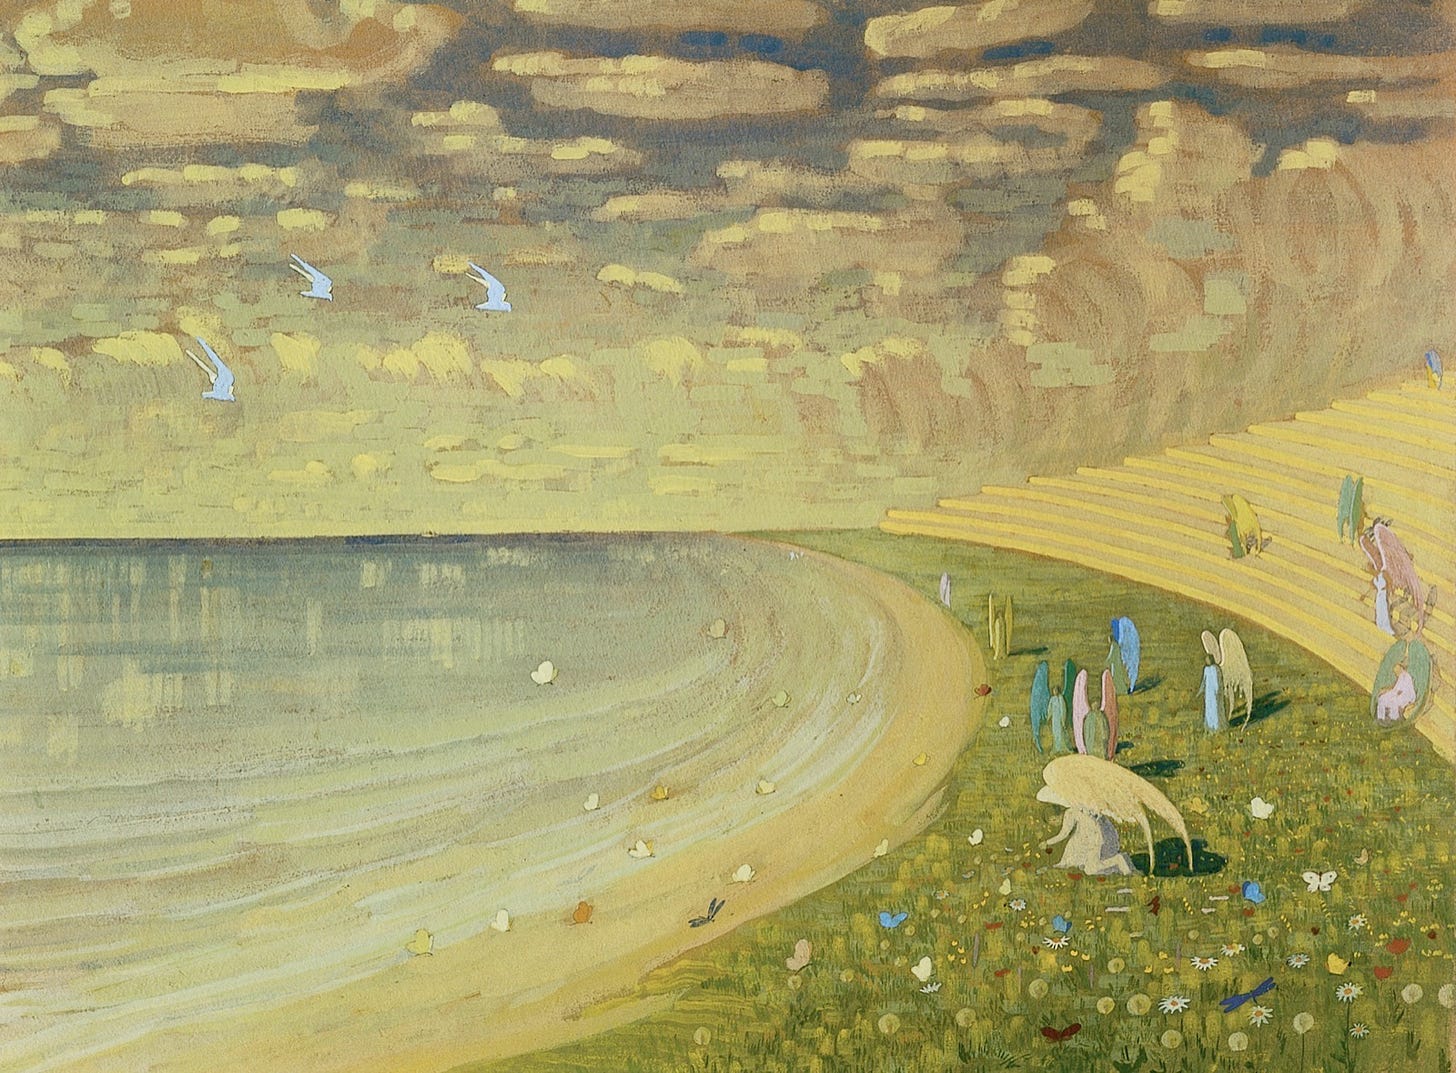 A sky dappled with golden clouds in an Impressionistic style hovers above a glassy lake. Three powder blue seagulls are caught mid-flap, their wings arrested at their highest point. On the right, a curved lake shore abuts a grassy swath of land, dotted with flowers and butterflies, which abuts wide curving stairs, like an amphitheater. On the grass and across the stairs are large-winged angels painted in pastel colors, in various attitudes: Some standing, some sitting, the one in the foreground, painted the same gold as the clouds, the sandy shore, and the stairs, is kneeling, plucking a flower from the ground. 